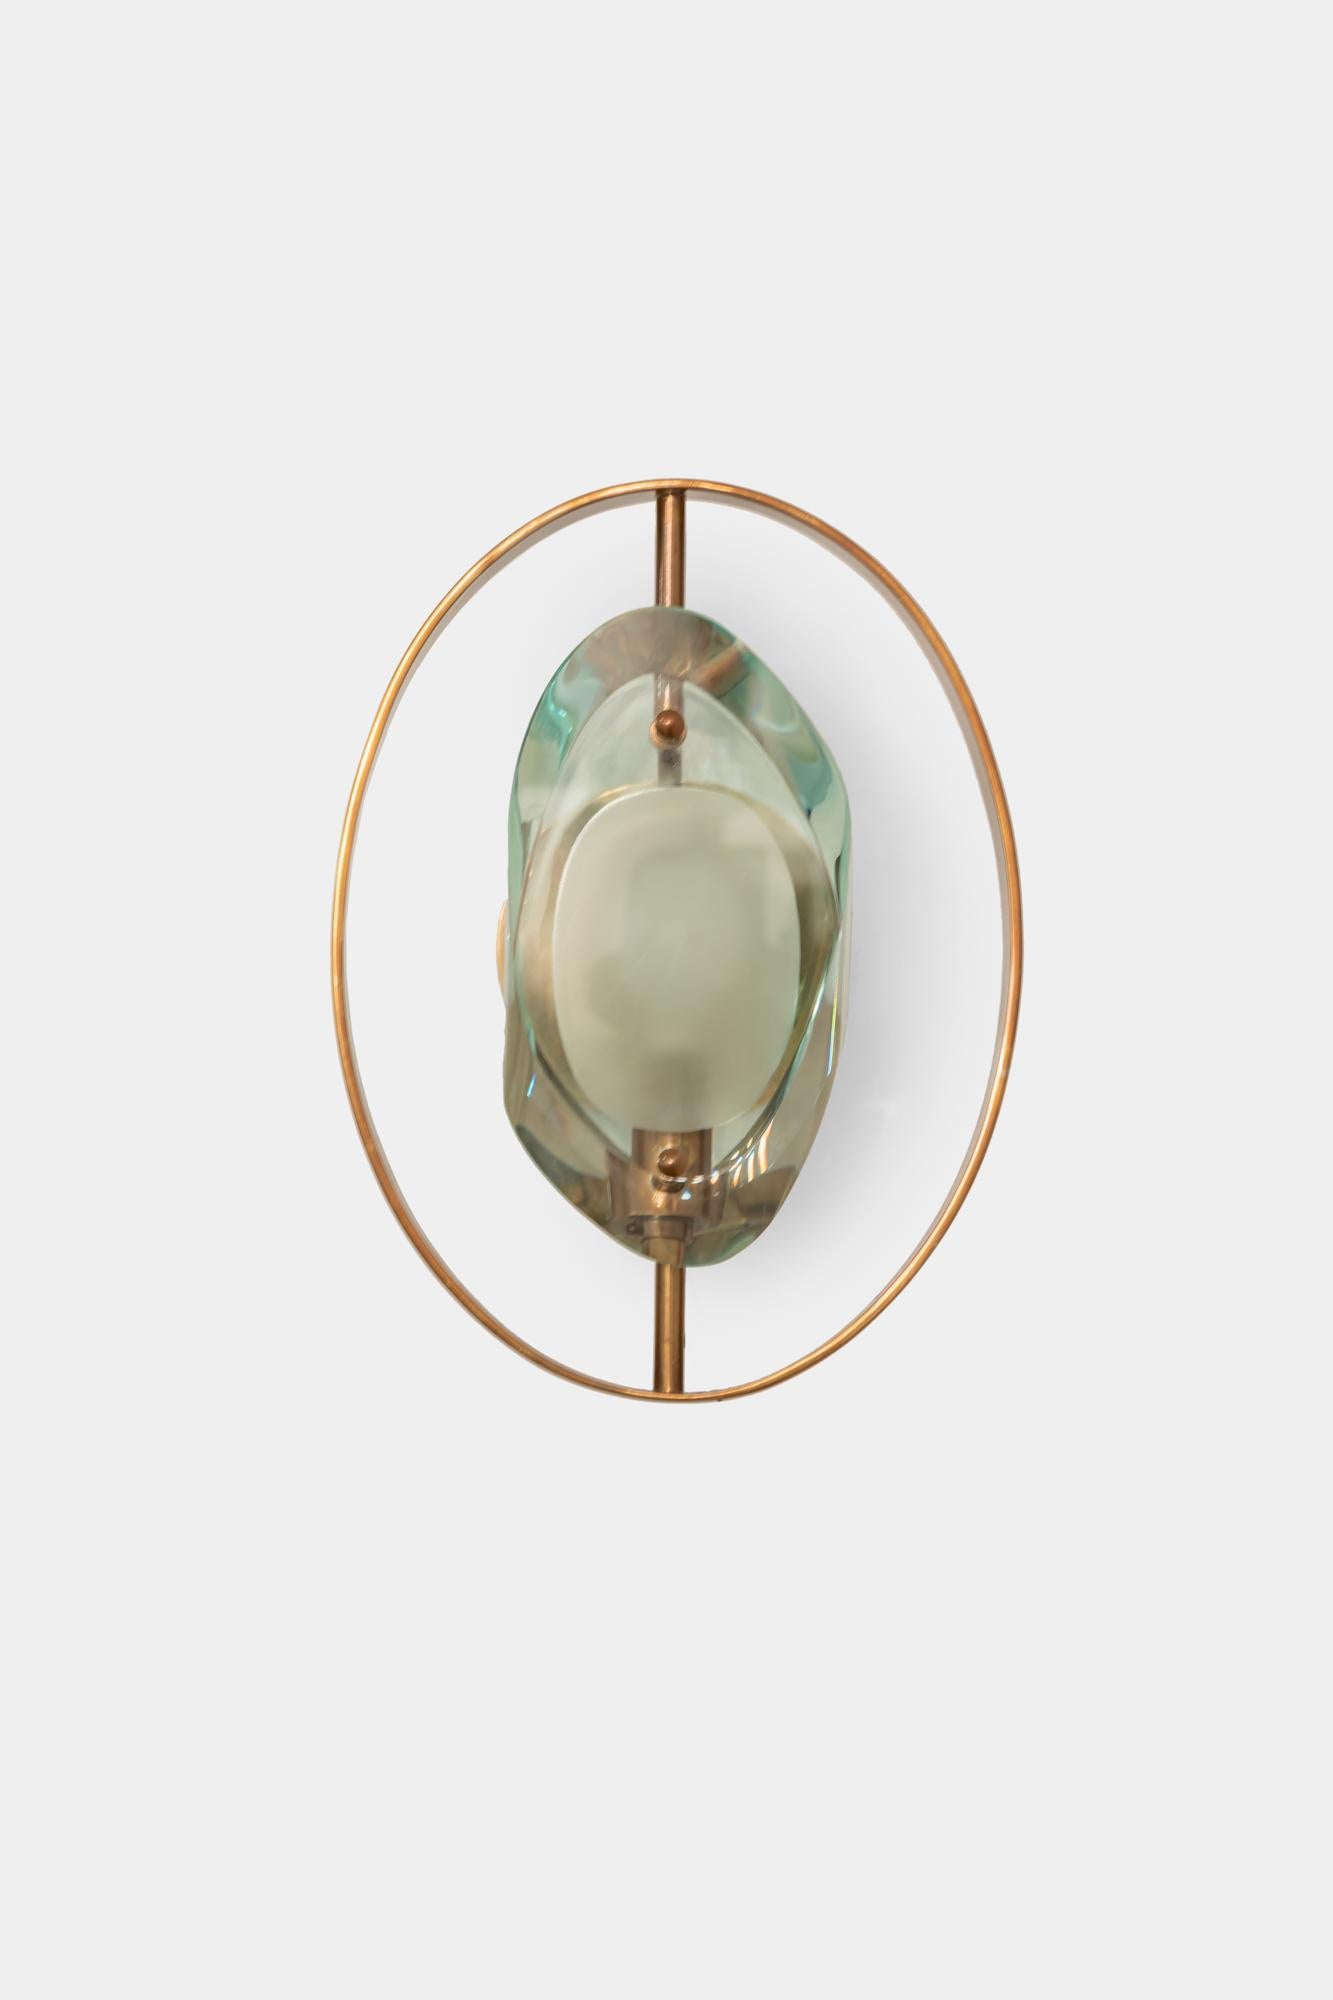 Max Ingrand for Fontana Arte rare pair of 'Micro' sconces model 2240 with double lens cut panels of thick profiled polished glass with etched glass centers and brass fittings.
Newly rewired to U.S. standards with custom